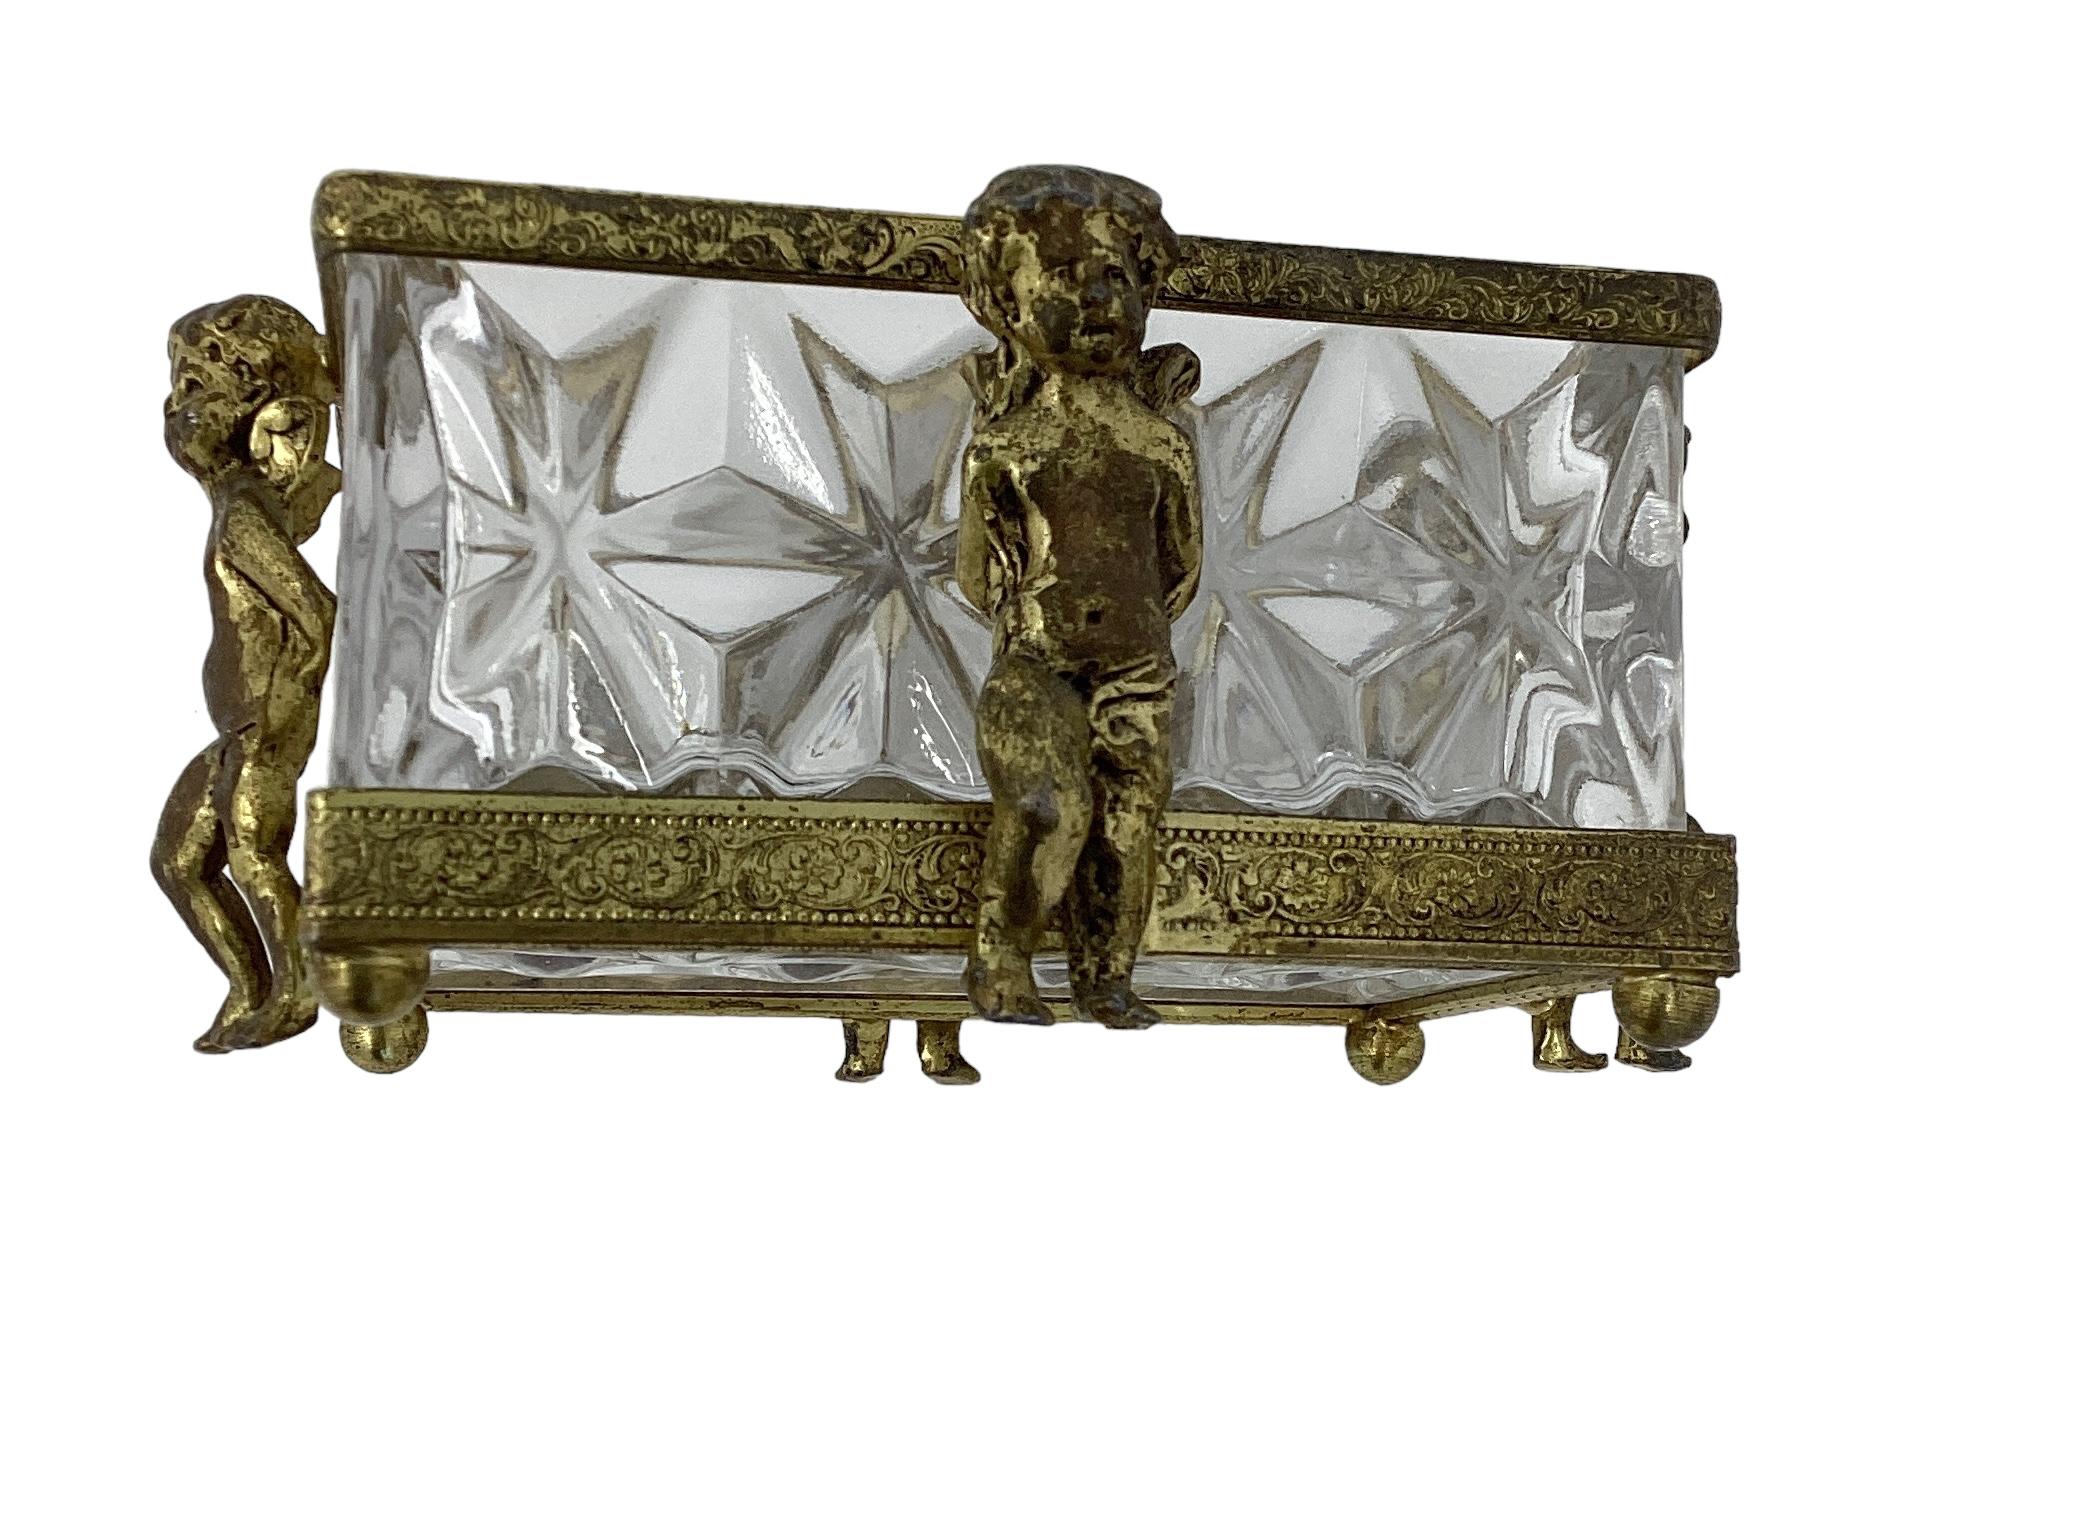 Antique Covered Crystal with Winged Bronze Puttis. The covered crystal box  with diamond shaped pattern sits in a bronze frame surrounded on four sides with putts. Wear and discoloration to putti.